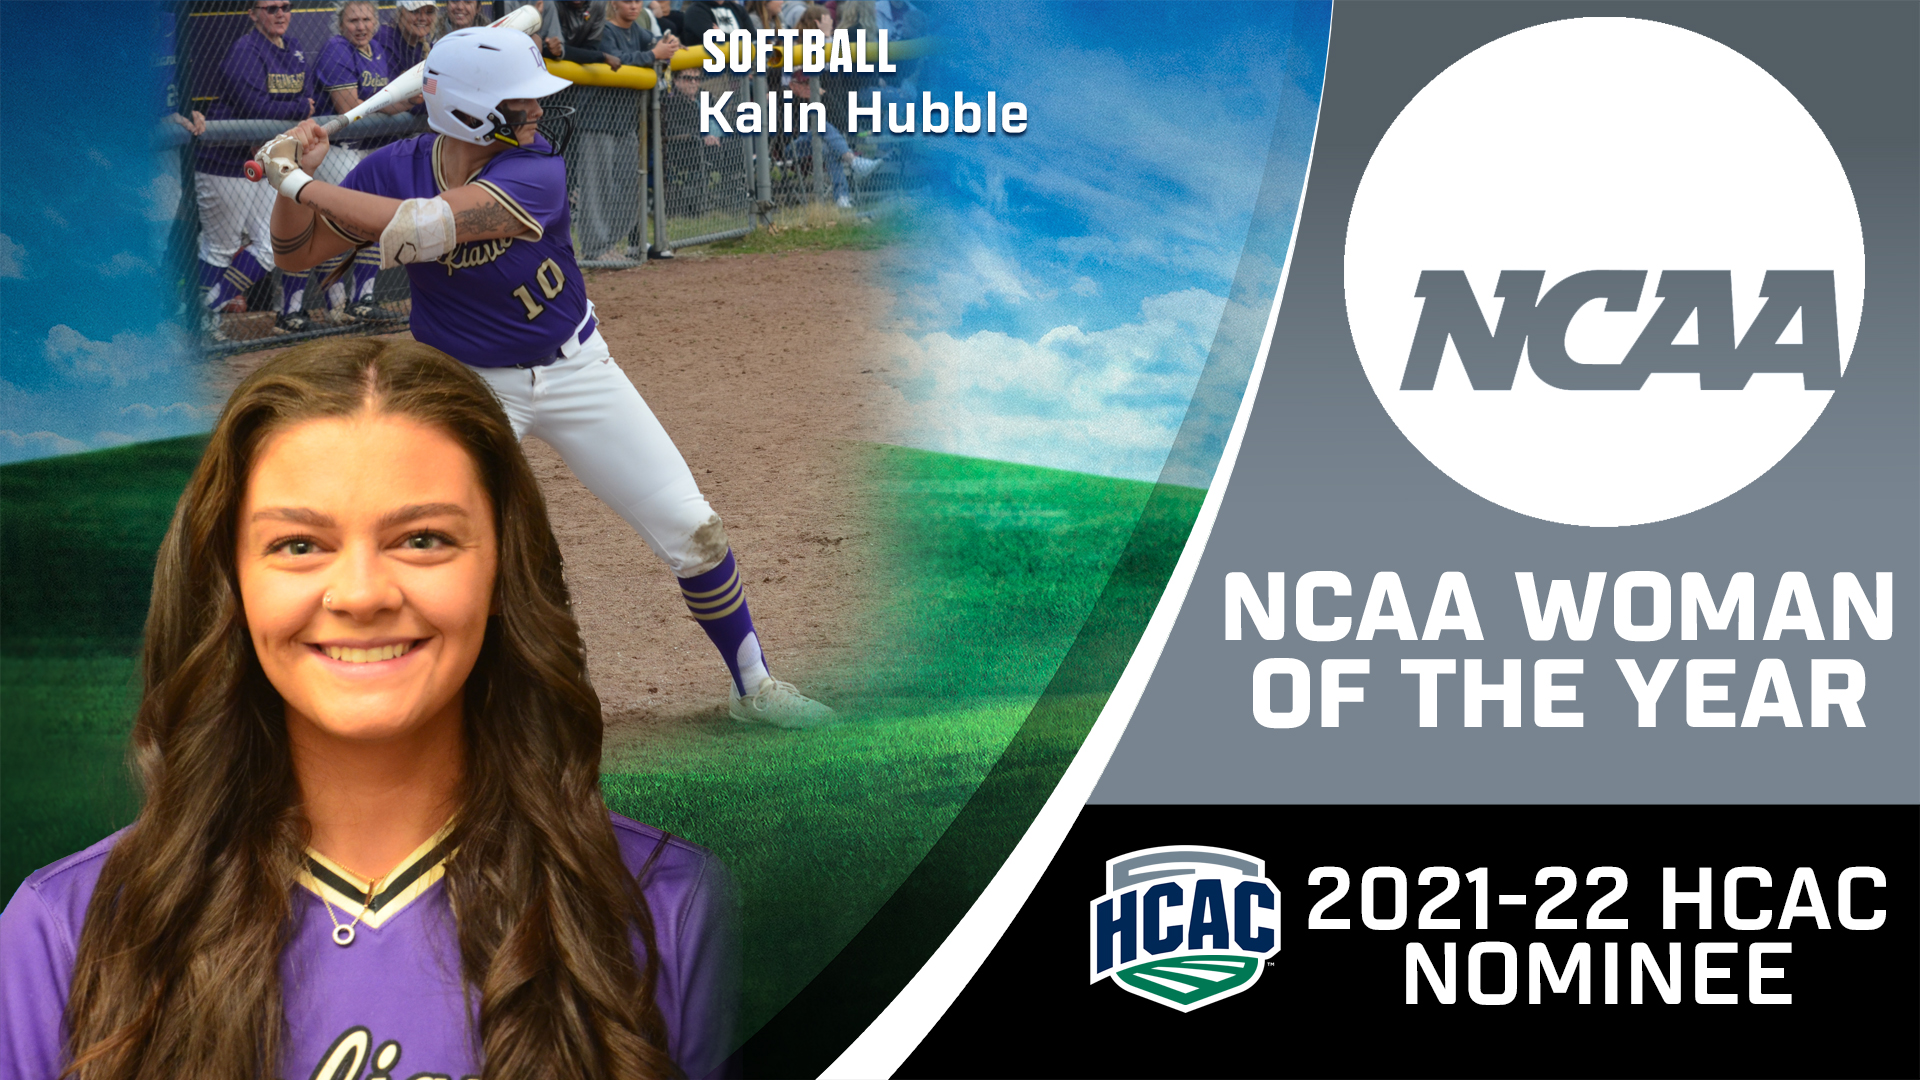 Hubble named the 2021-22 HCAC Nominee for the NCAA Woman of the Year